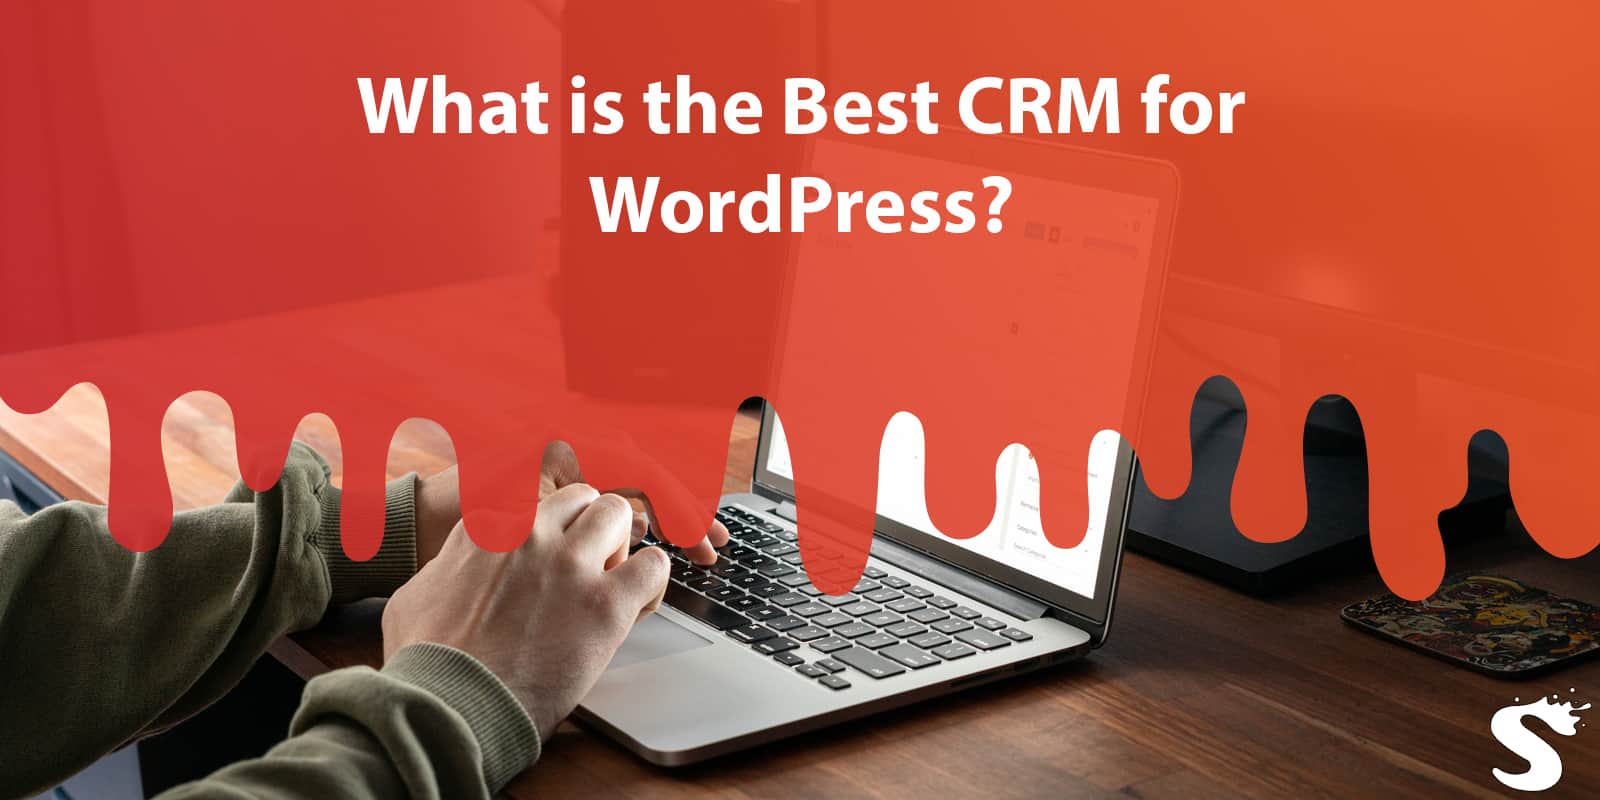 What is the Best CRM for WordPress?